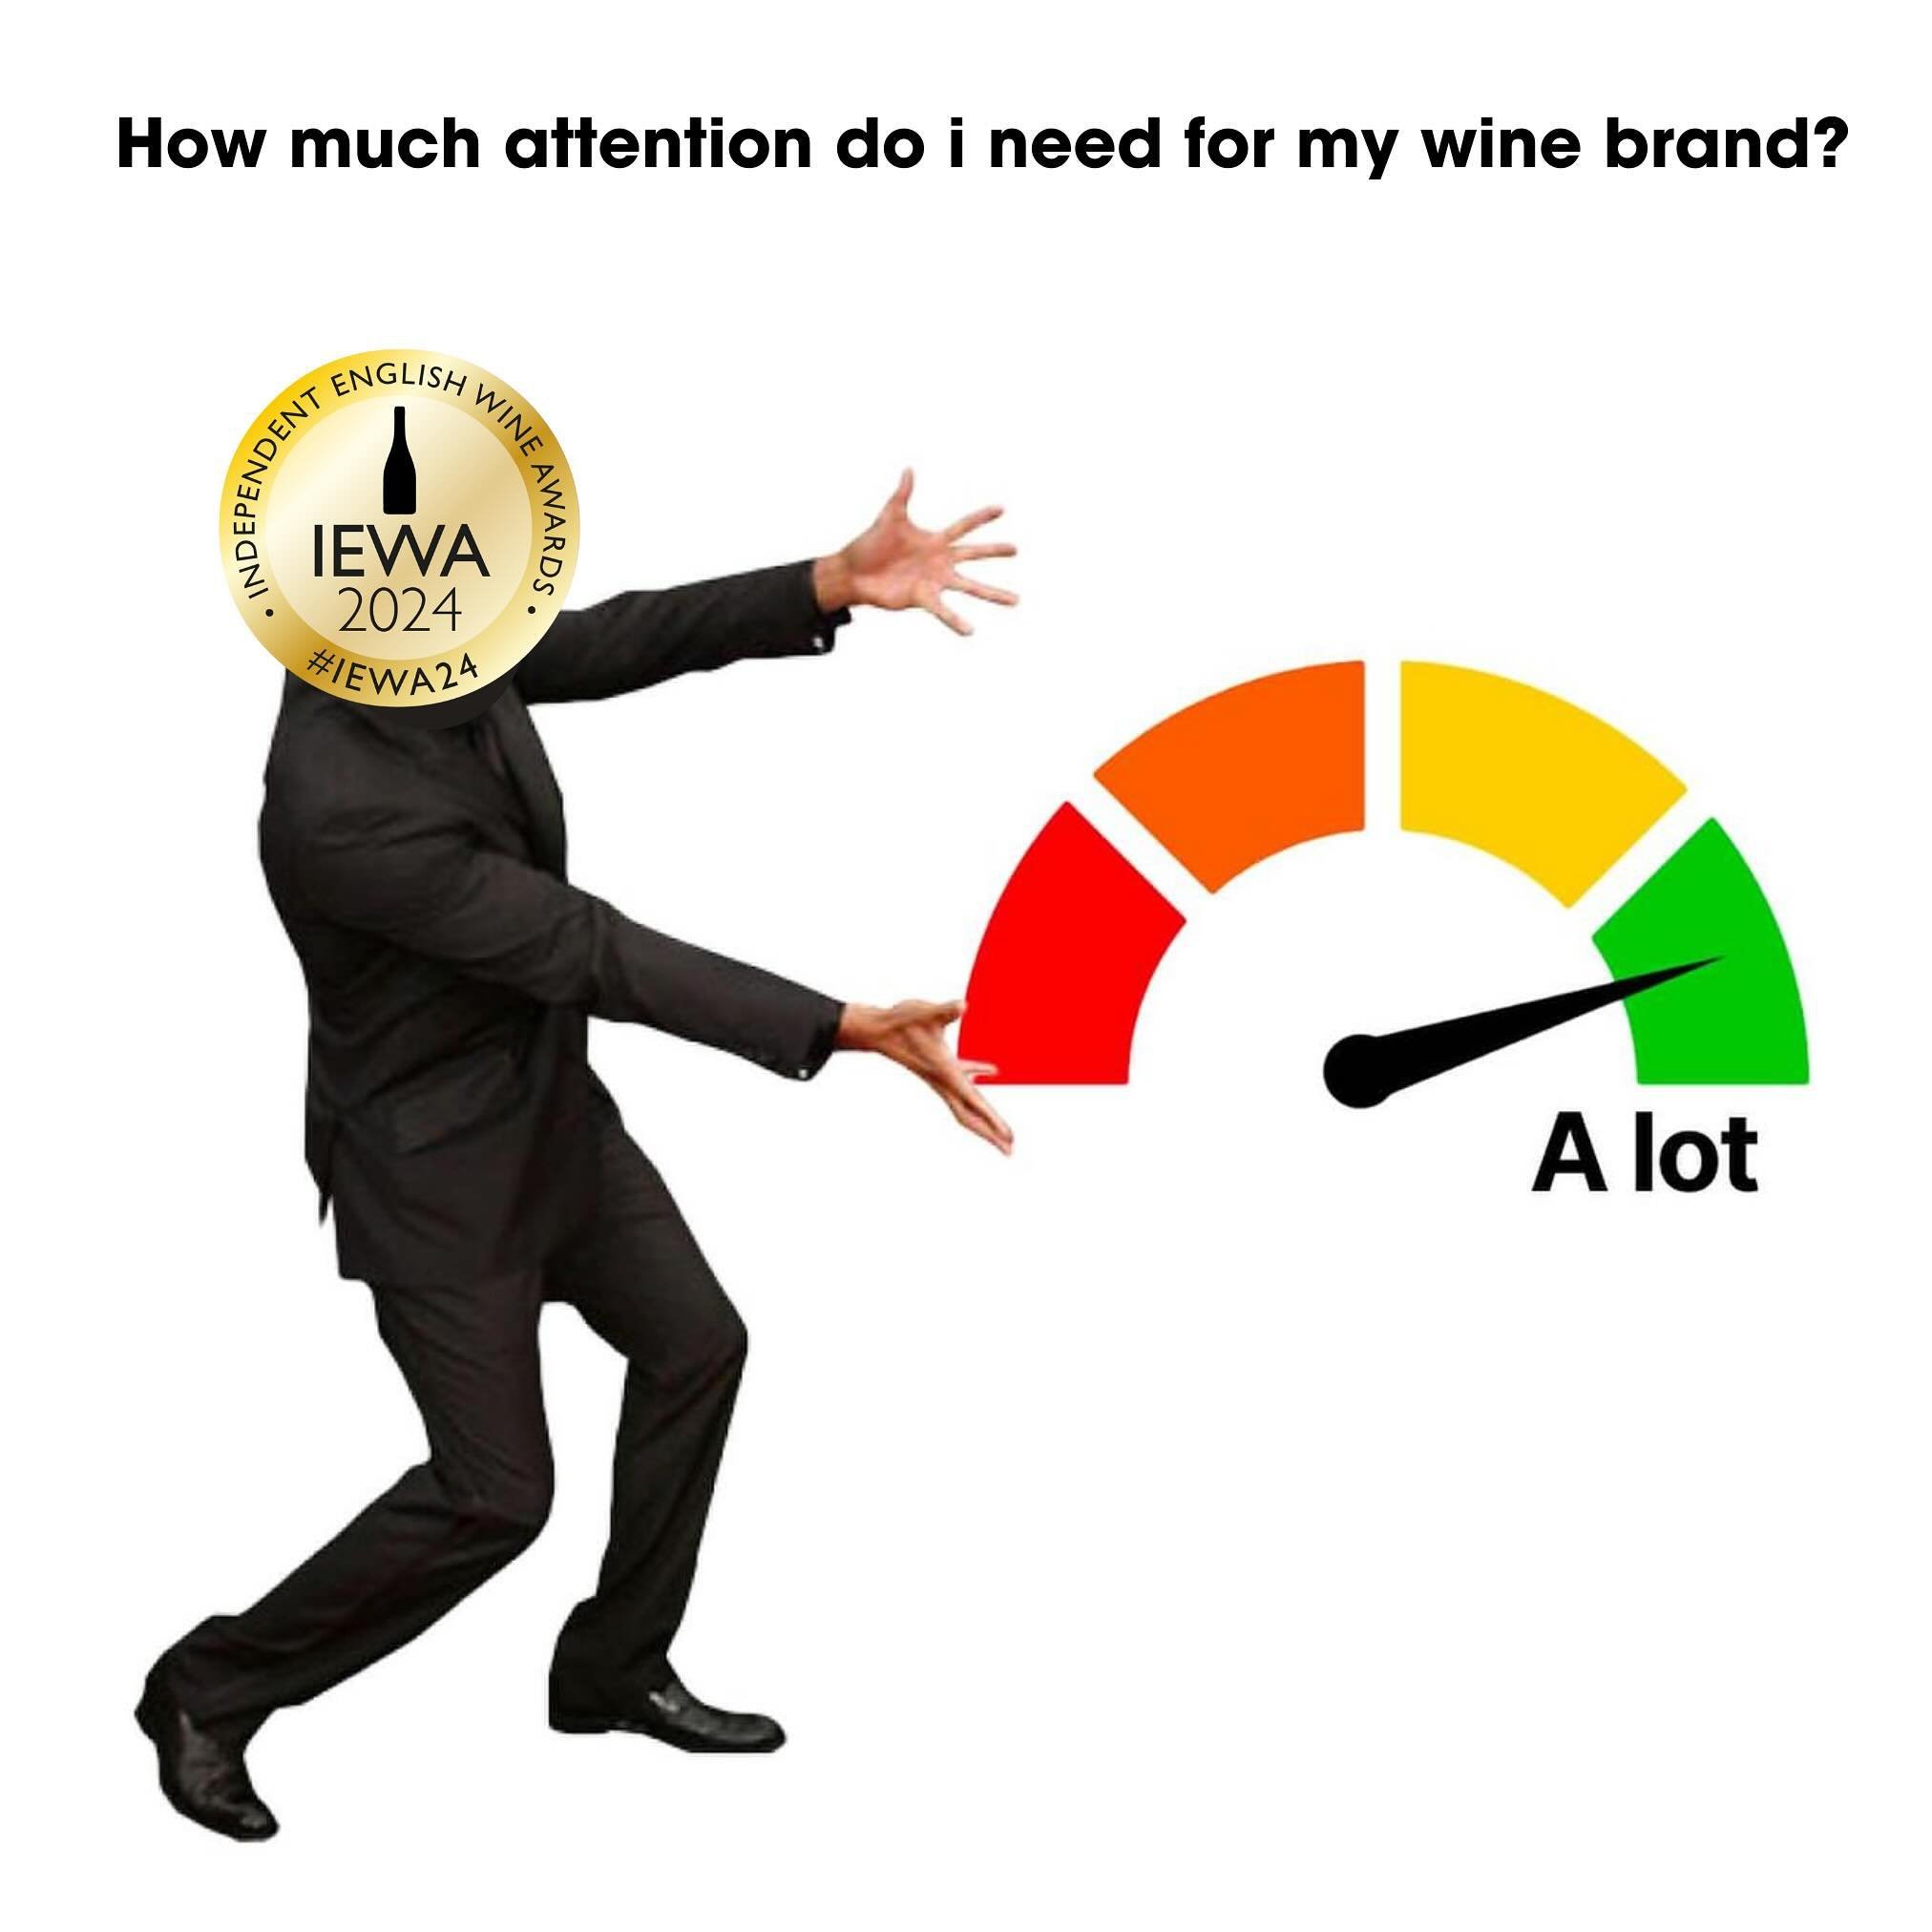 #IEWA24 is judging on Saturday. Let&rsquo;s do this! 😀🙌🥂🔥

Image credit: @garyvee 

#EnglishWine #EnglishWineCompetition #TheIEWA #winesocial #winecompetition #deadlineday #TheIEWA #WineComp #Wine #socialmedia #winemarketing